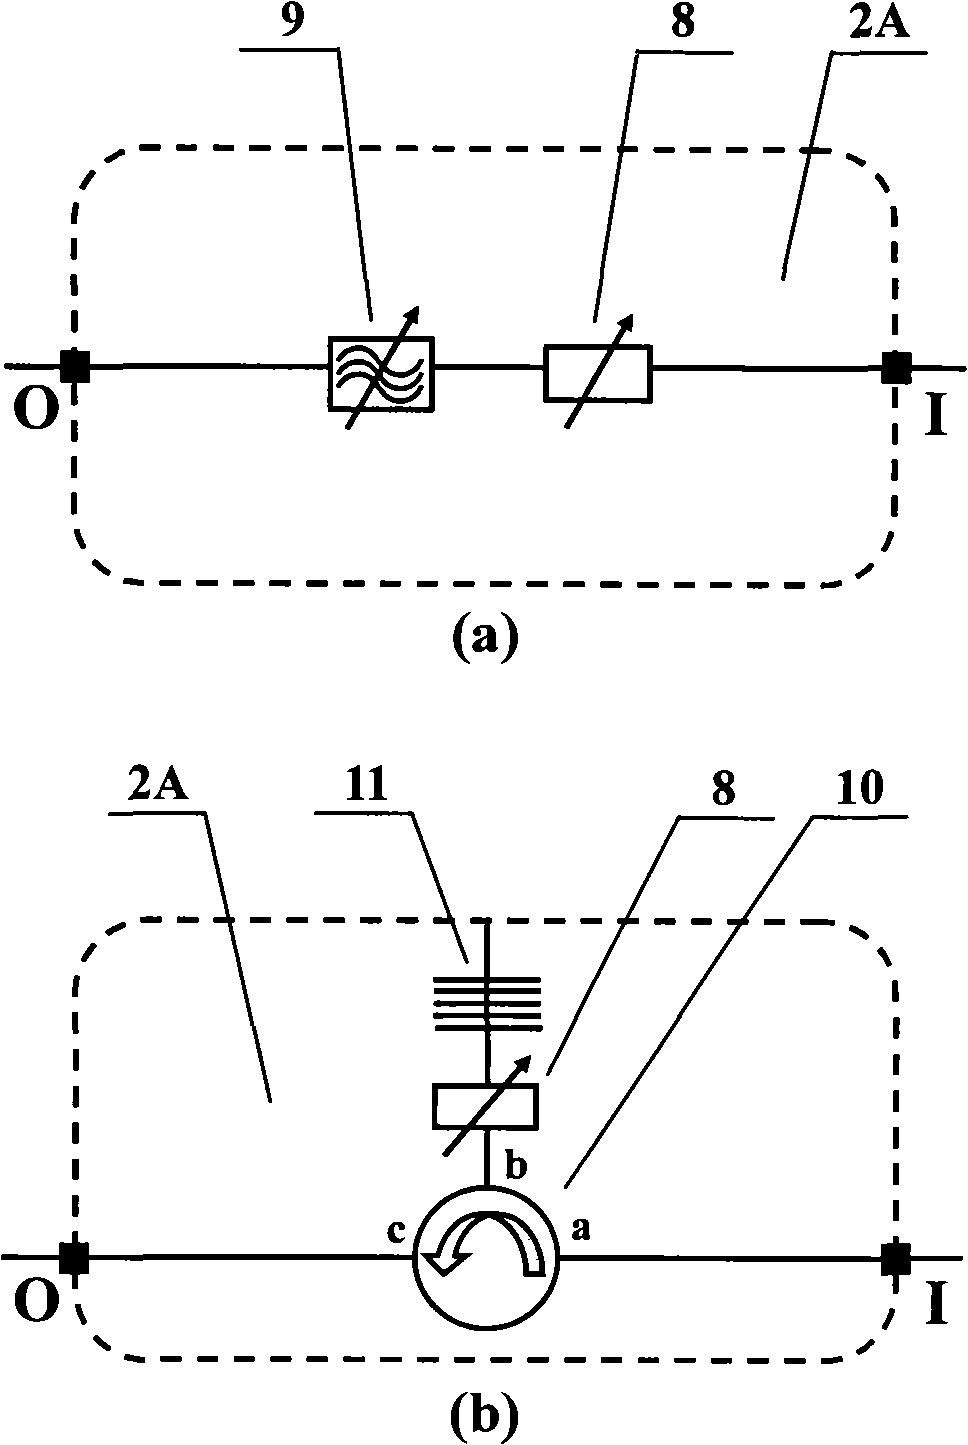 Full optical wavelength converting device based on non-linear optical waveguide